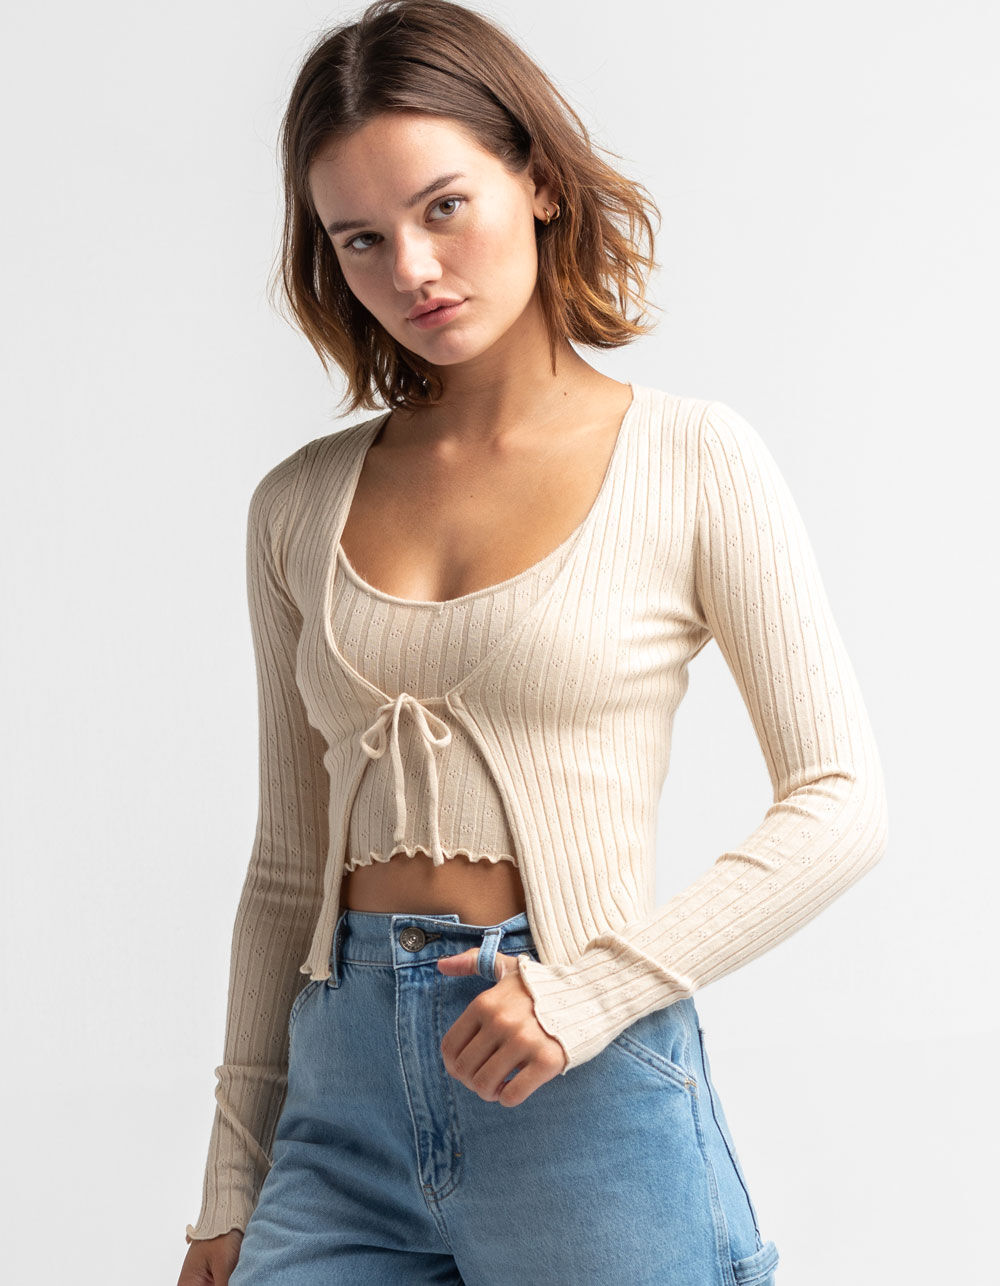 SKY AND SPARROW Tie Front Womens Tan Pointelle Cardigan - TAN - 413199412